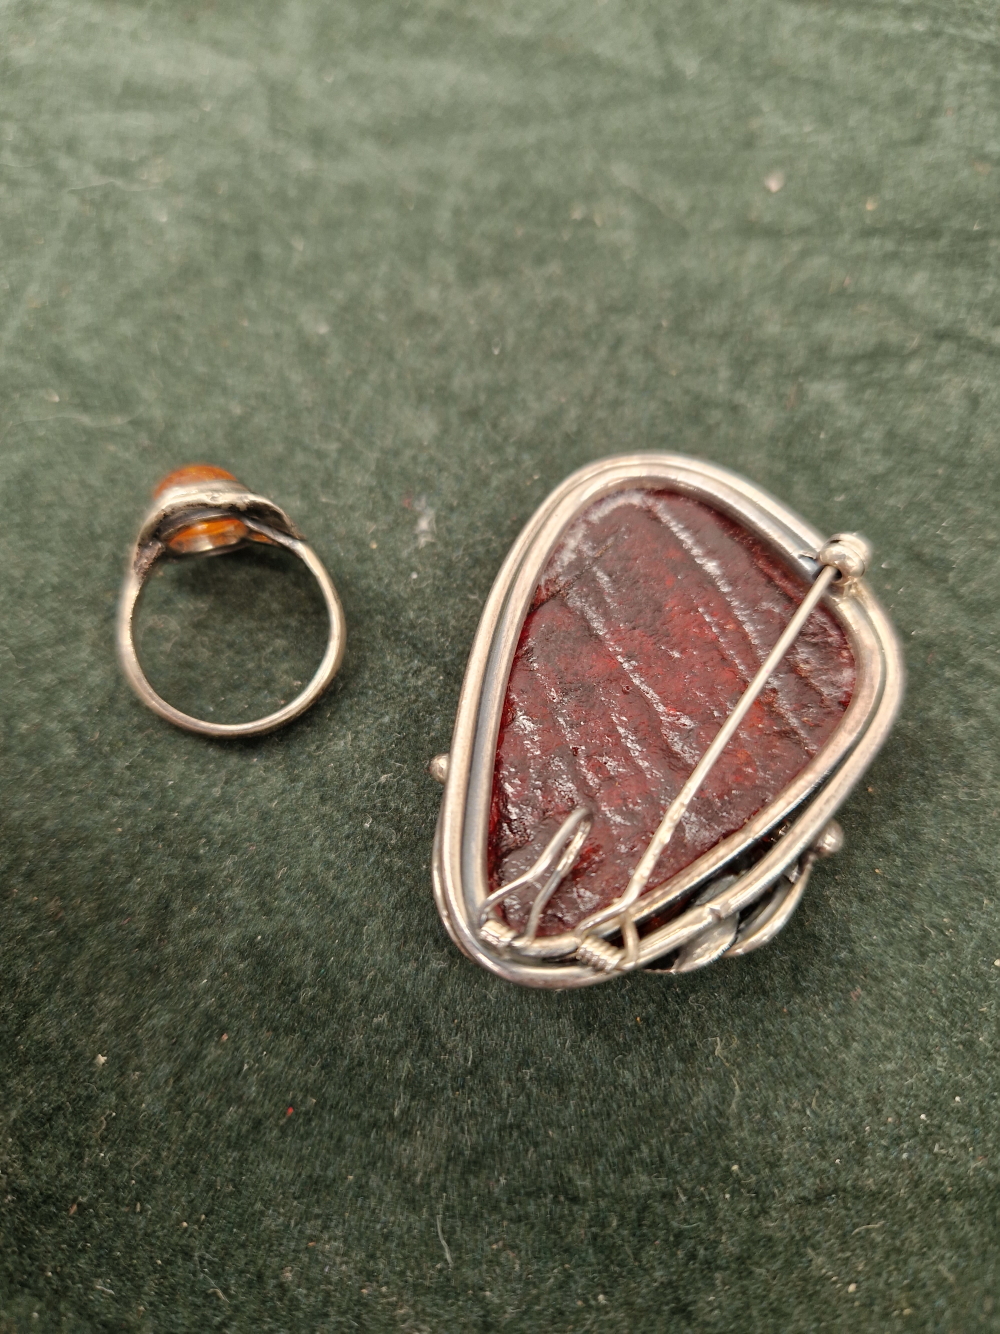 A SILVER AND AMBER ART NOUVEAU STYLE BROOCH/PENDANT AND A SIMILAR WHITE METAL AND AMBER RING - Image 2 of 3